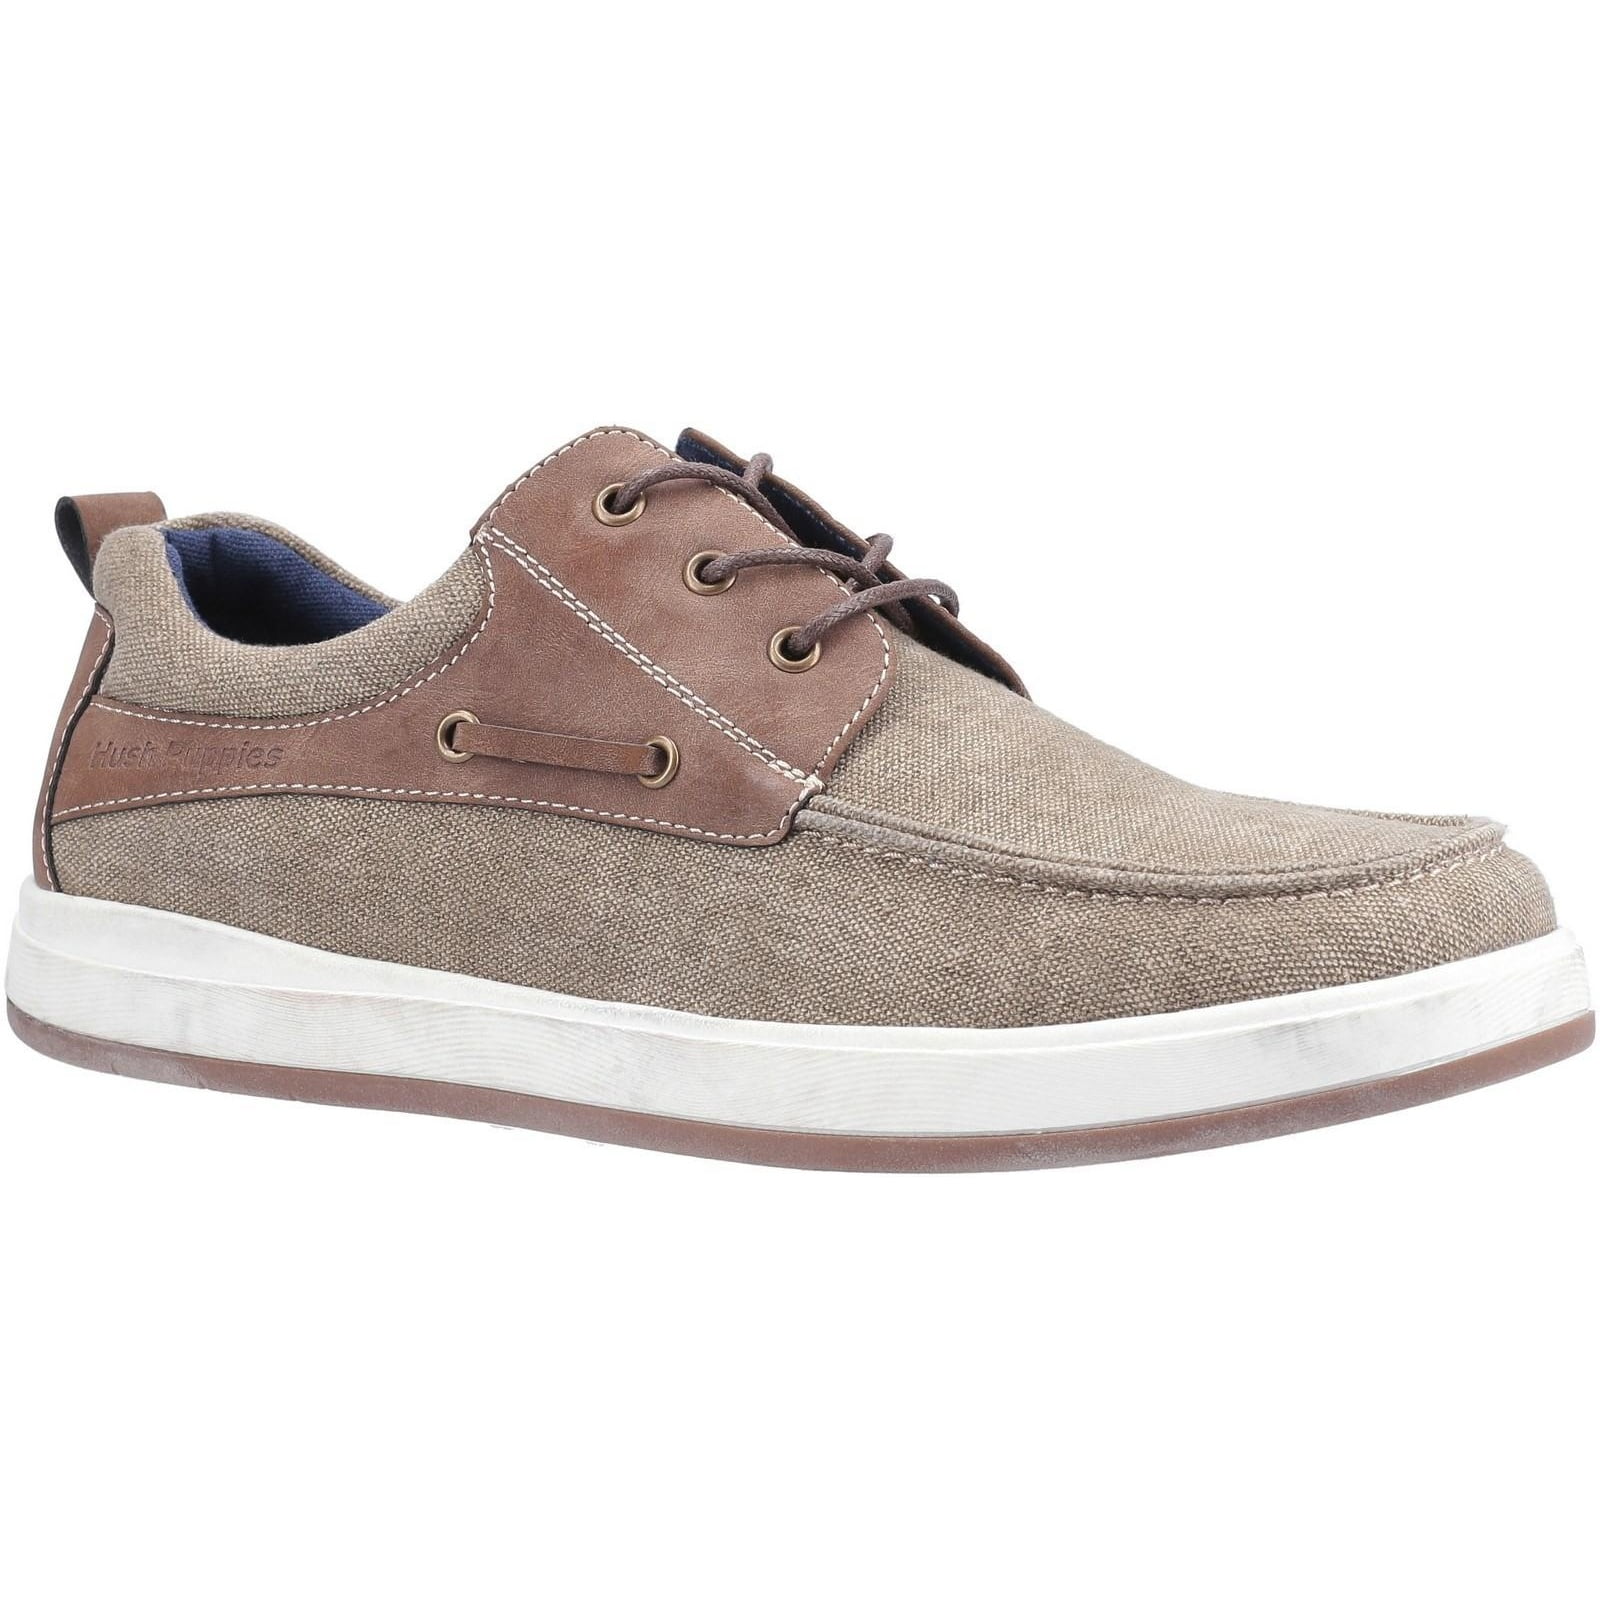 Hush Puppies Mens Aiden Lace Up Boat Shoe | Walmart Canada